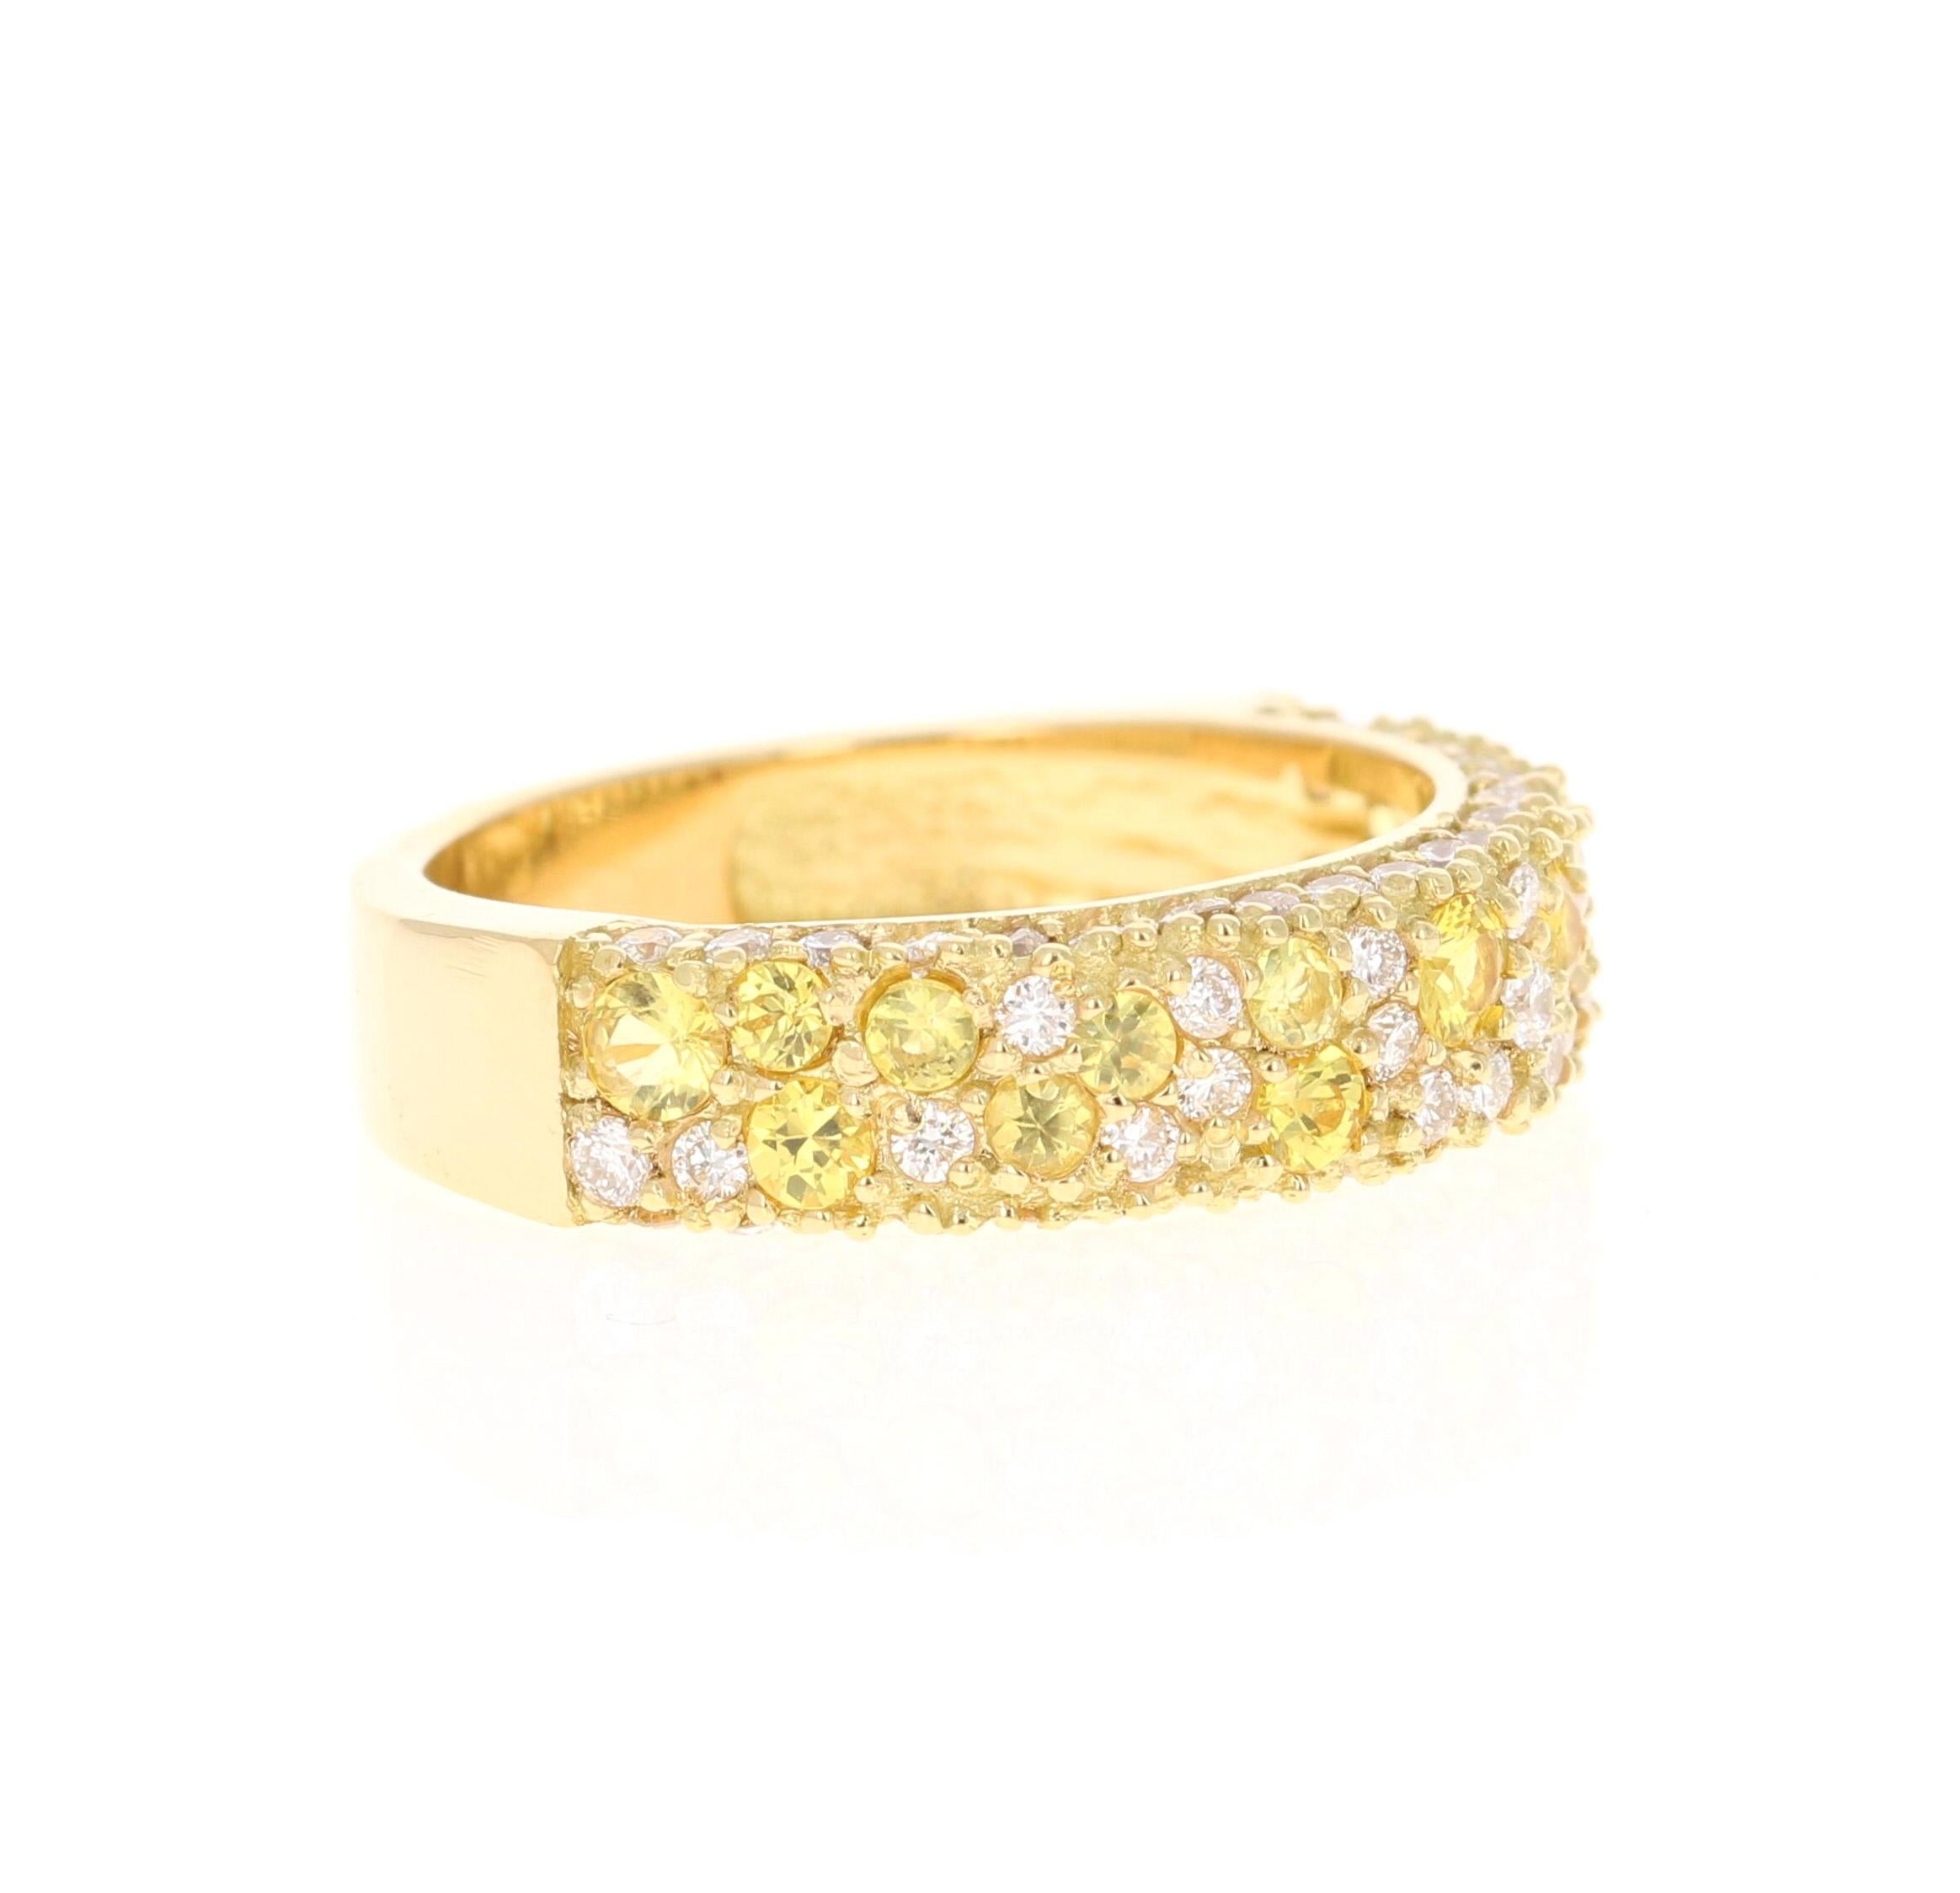 This Yellow Sapphire and White Diamond Band is stunning and versatile! Can be worn as a wedding or engagement band or as a gorgeous cocktail ring or an everyday stunner! 

There are 59 Round Cut Diamonds that weigh 0.75 Carats and 16 Round Cut